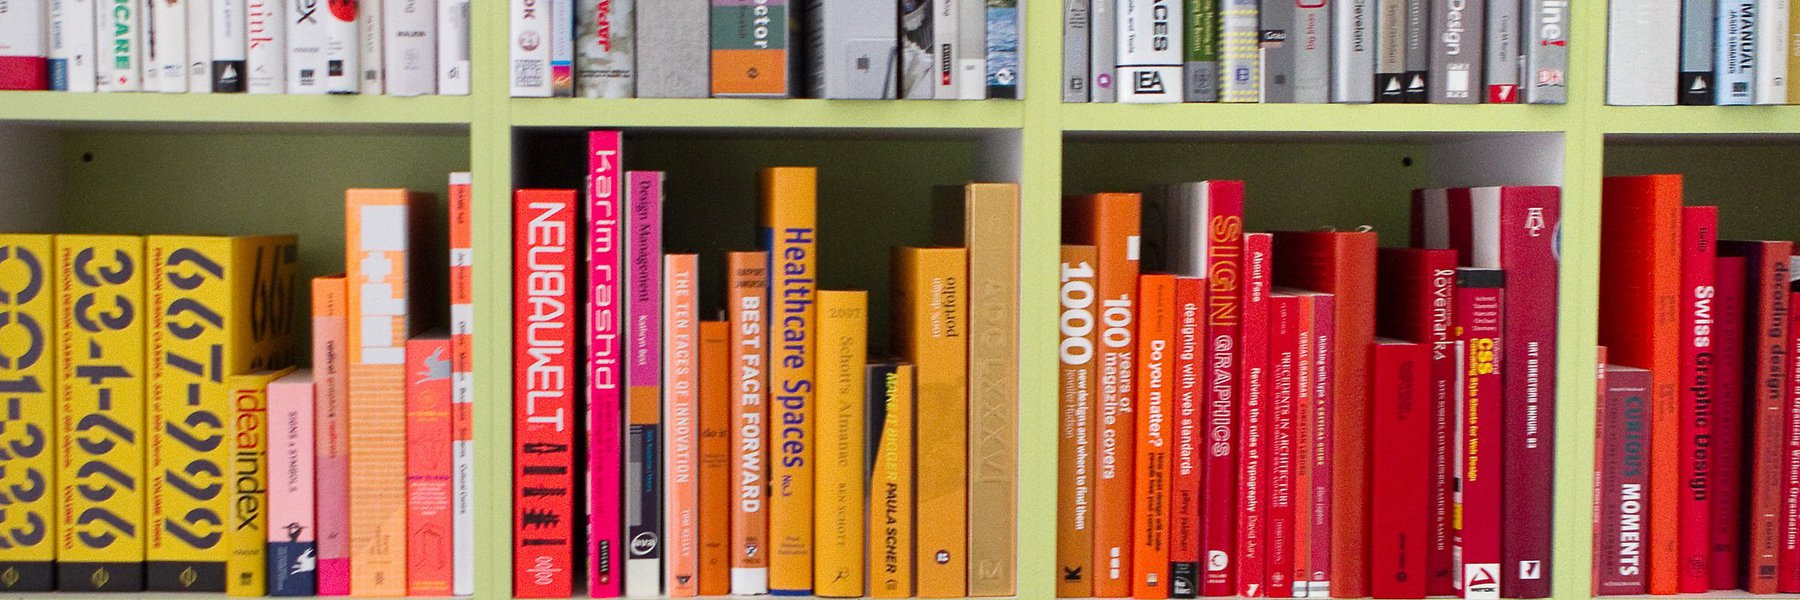 A picture of a collection of books, organized by color on green square shelves.